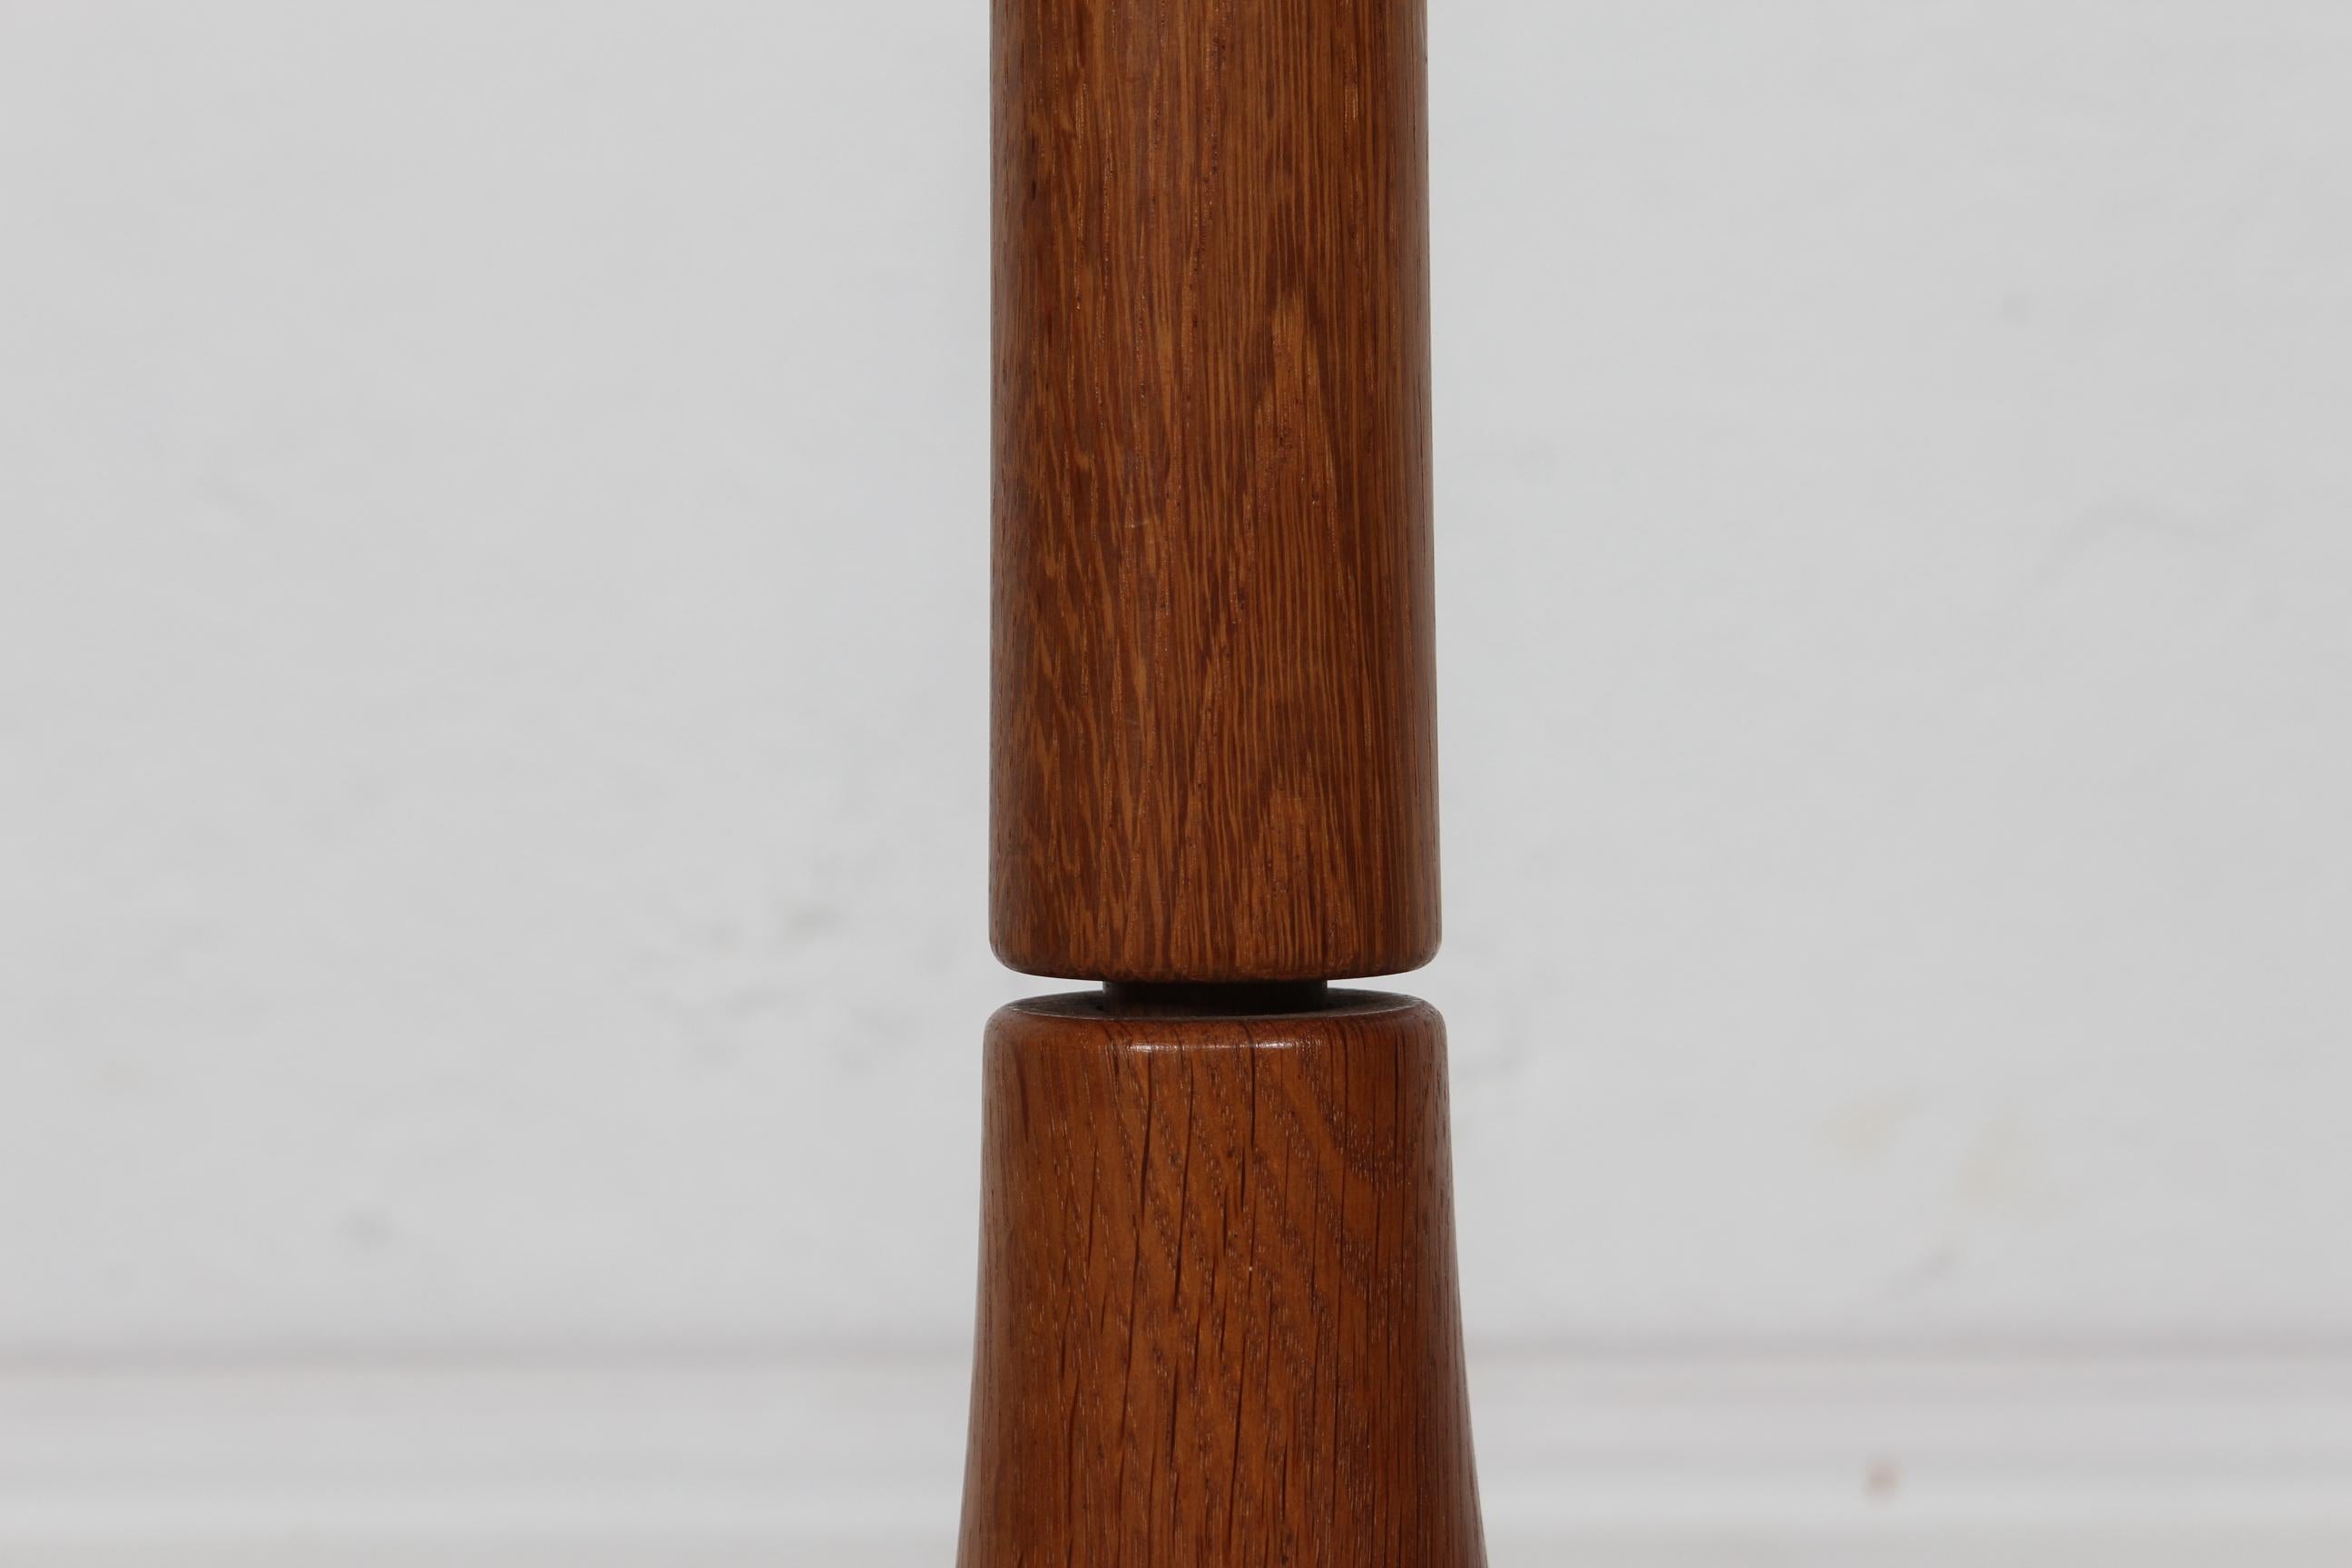 Woodwork Danish Lisbeth Brams Floor Lamp of Hand-turned Teak with New Shade 1960s For Sale